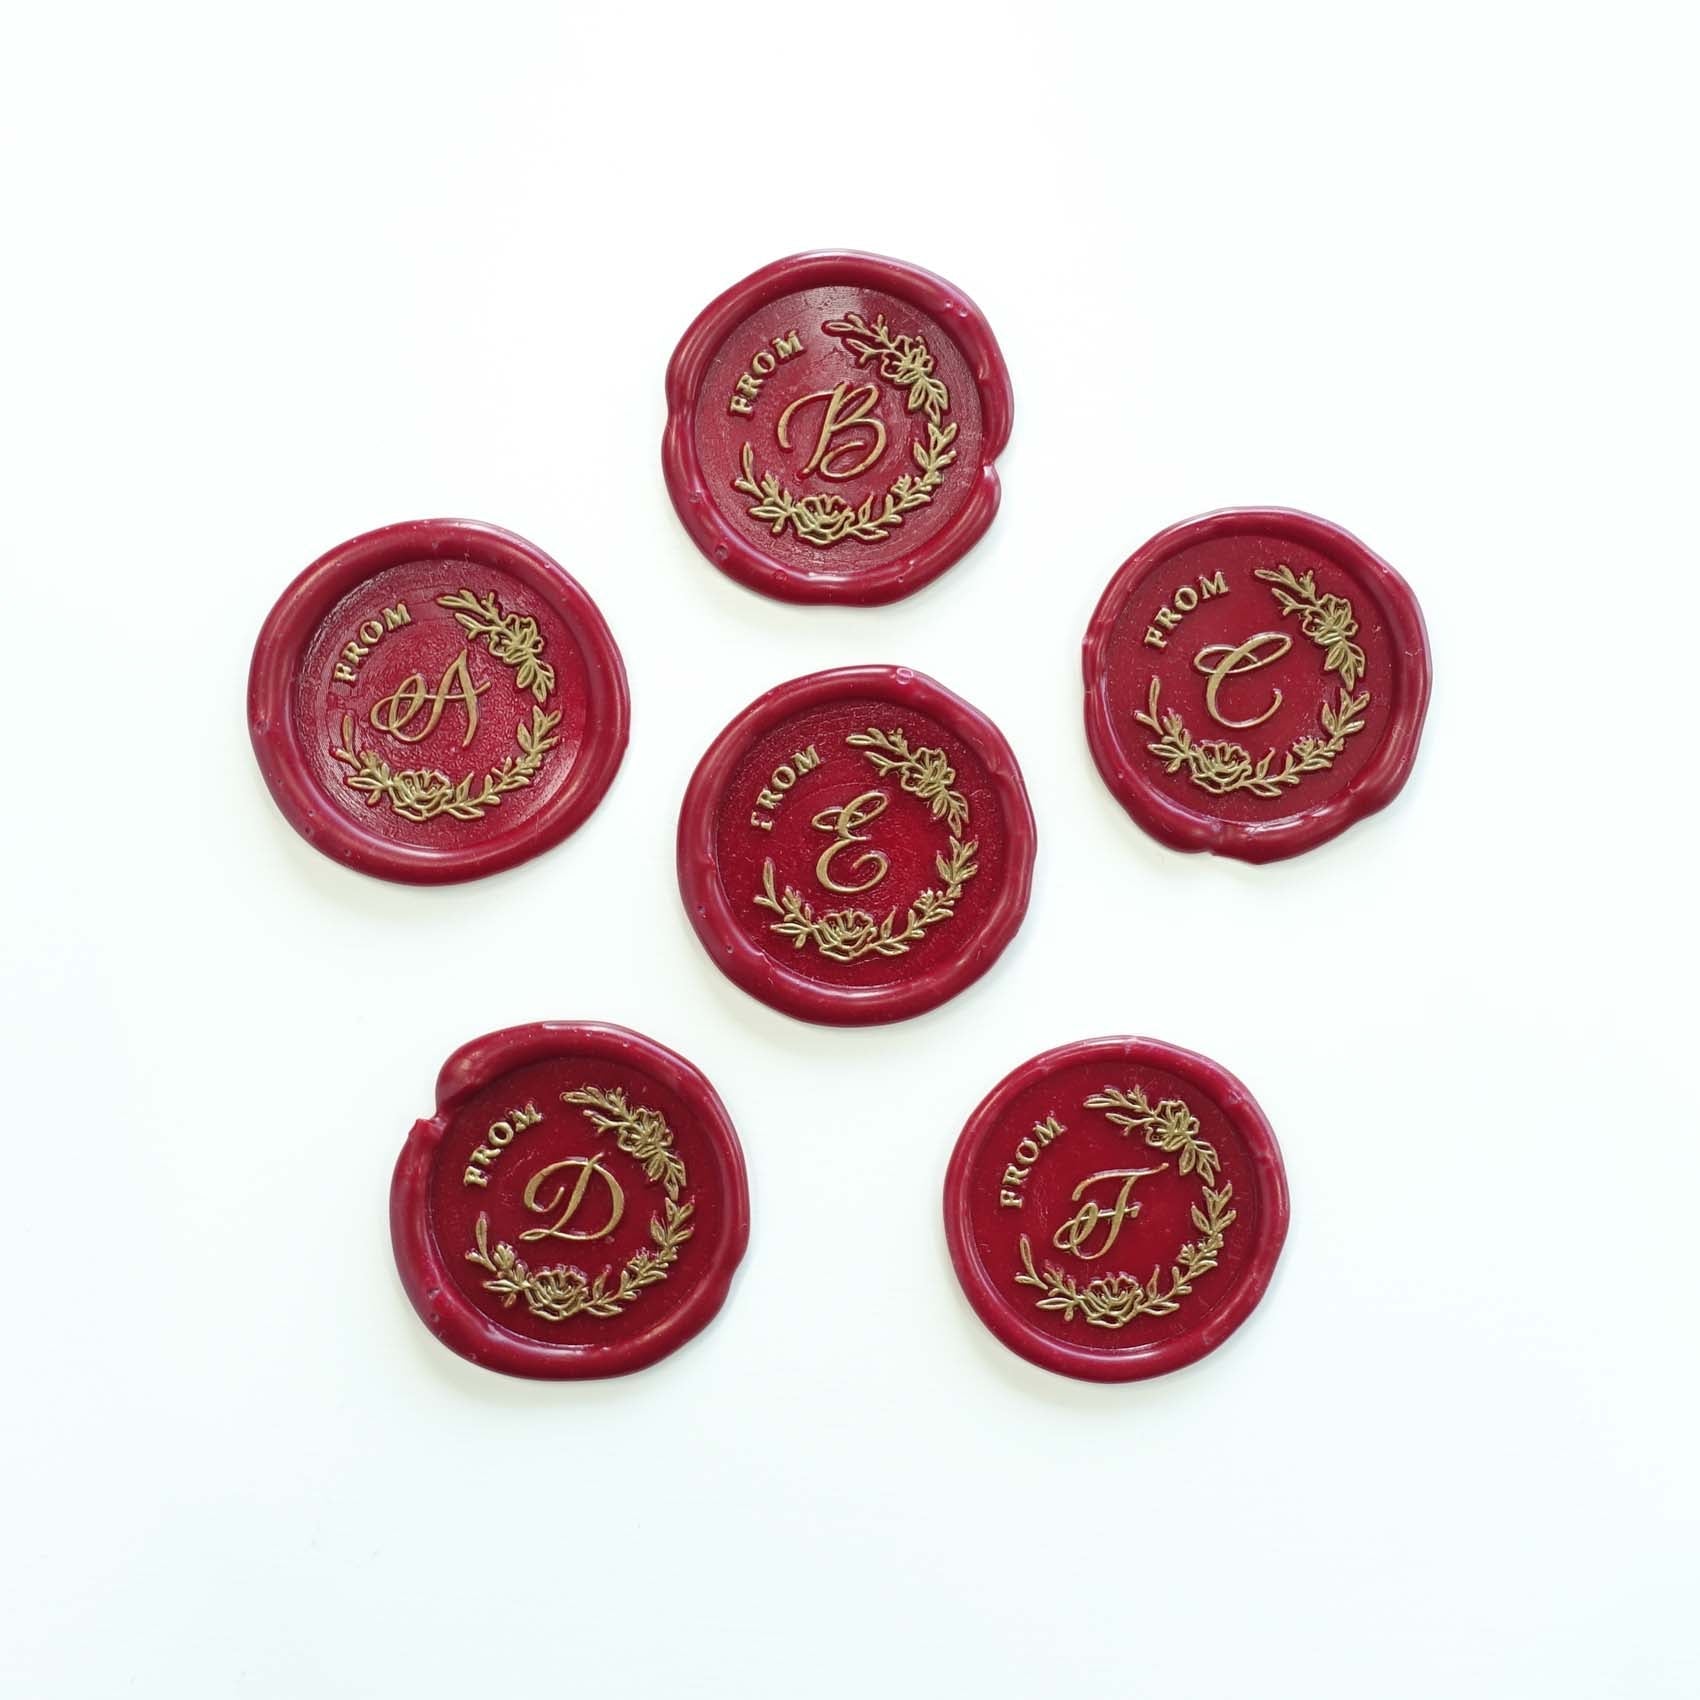 From A to Z Alphabet Letters - Wax Seal Stamp (includes handle)